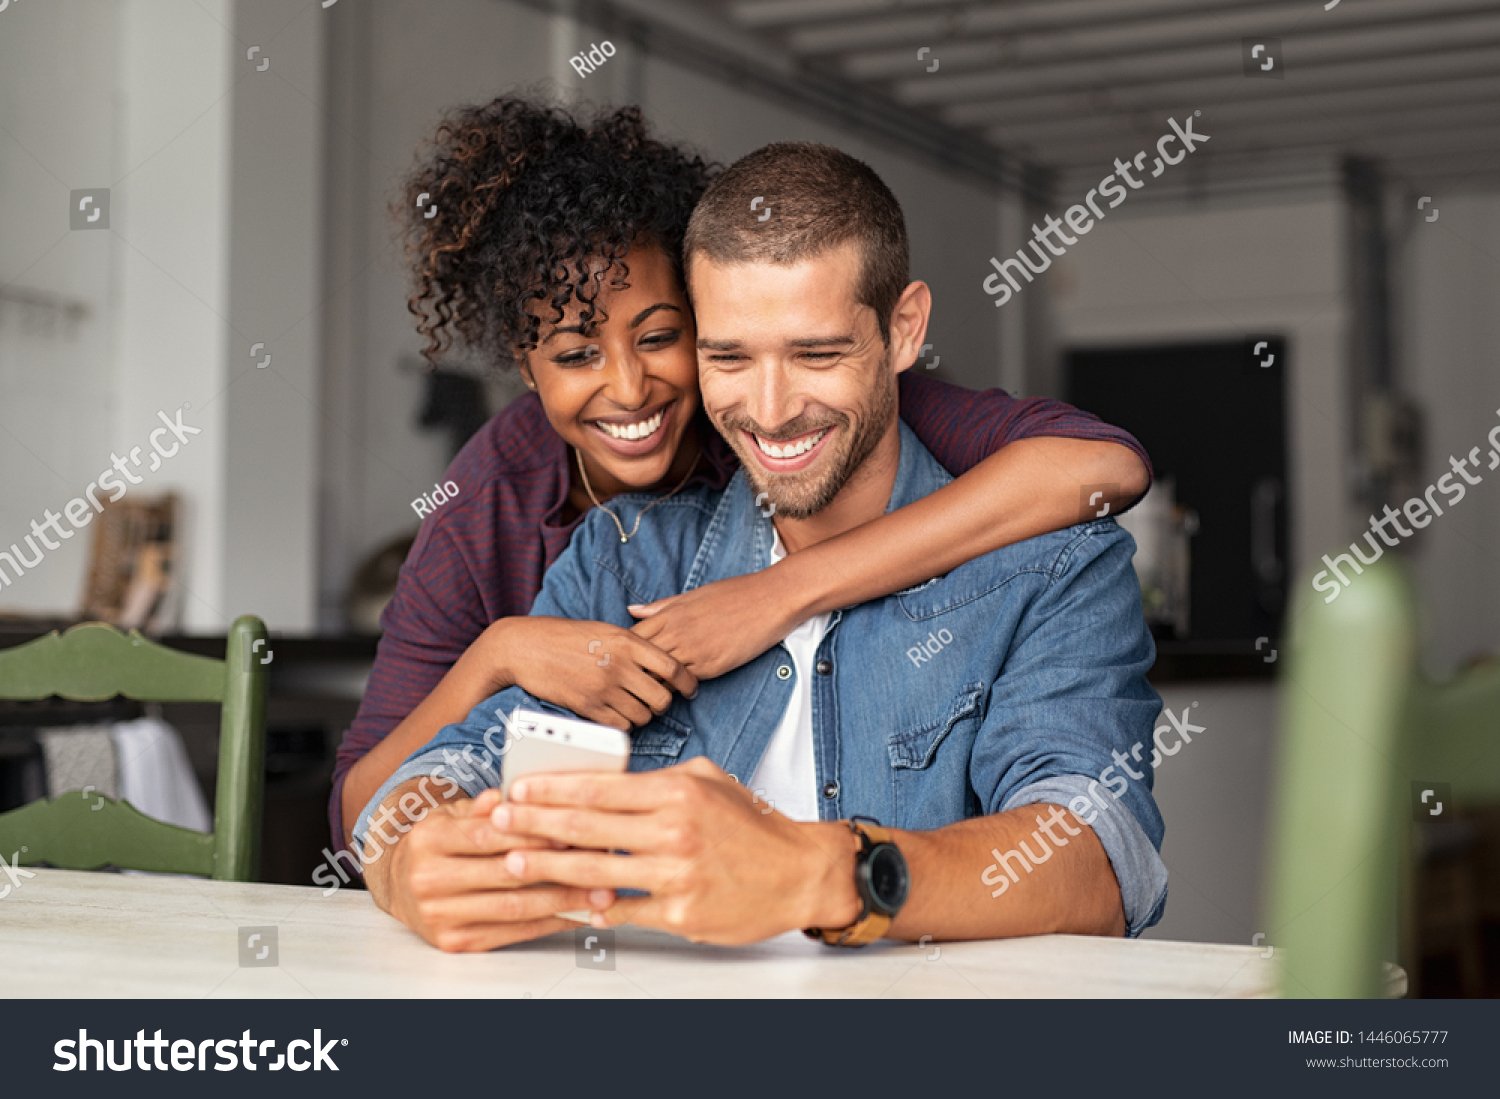 Smiling young couple embracing while looking at smartphone. Multiethnic couple sharing social media on smart phone. Smiling african girl embracing from behind her happy boyfriend while using cellphone #1446065777